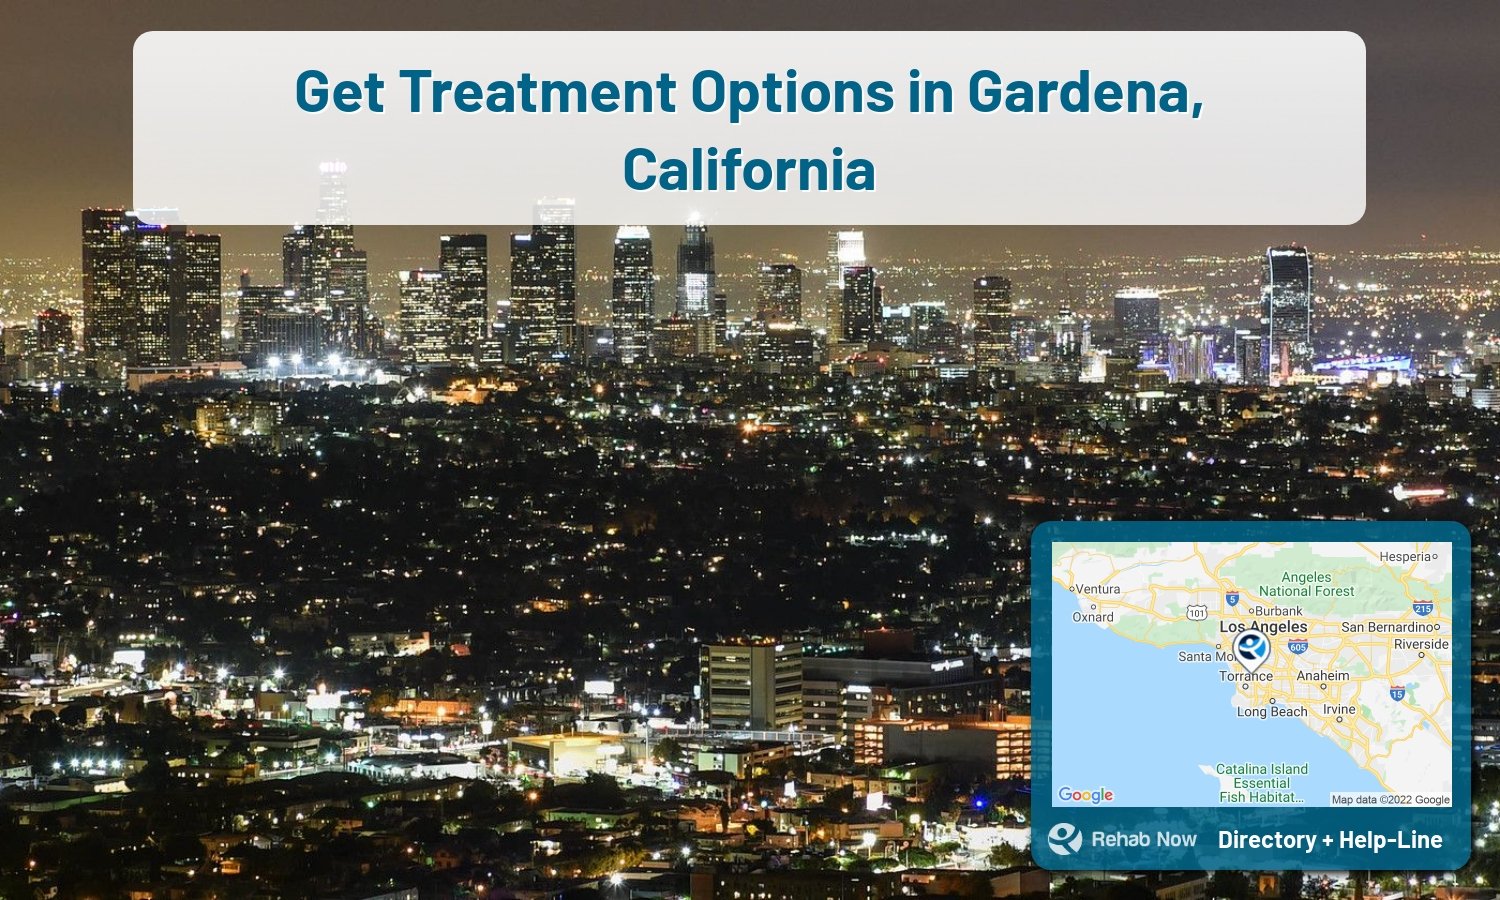 Drug rehab and alcohol treatment services nearby Gardena, CA. Need help choosing a treatment program? Call our free hotline!